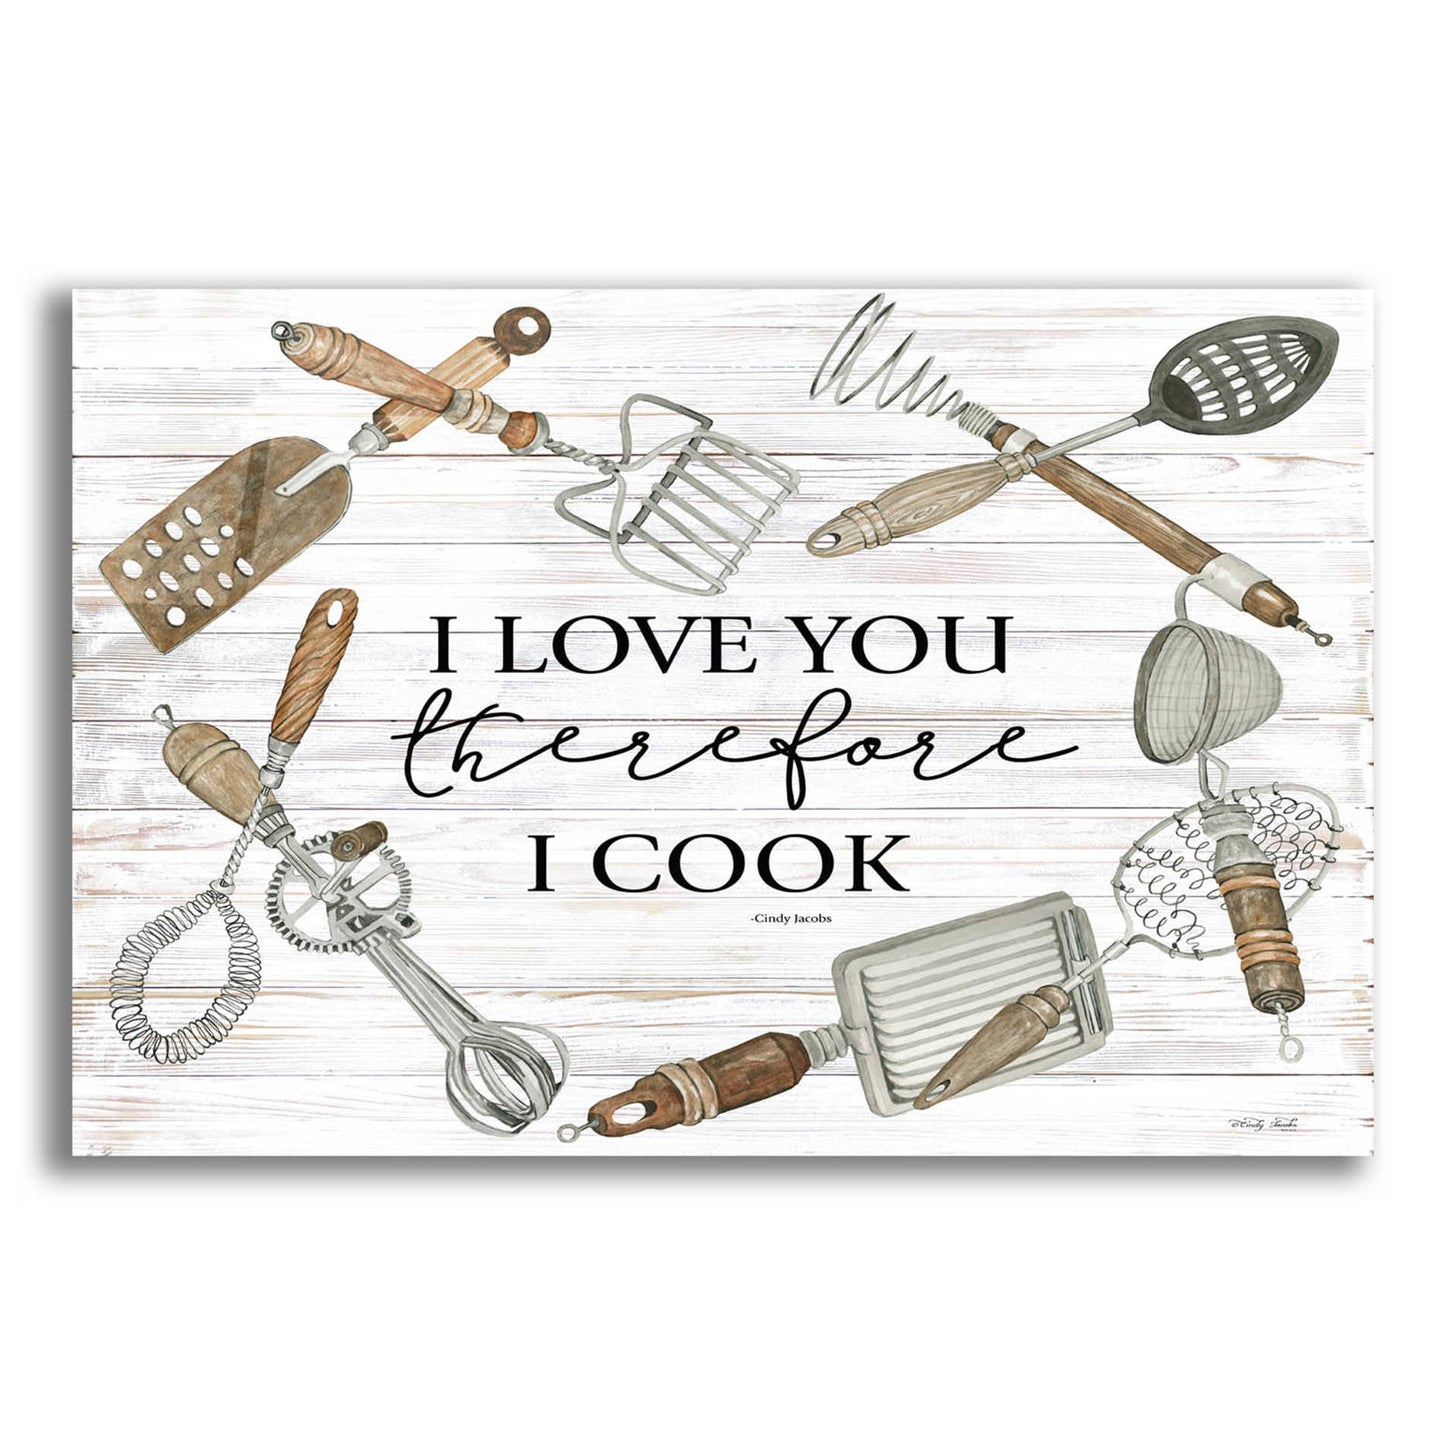 Epic Art 'I Love You Therefore I Cook' by Cindy Jacobs, Acrylic Glass Wall Art,24x16